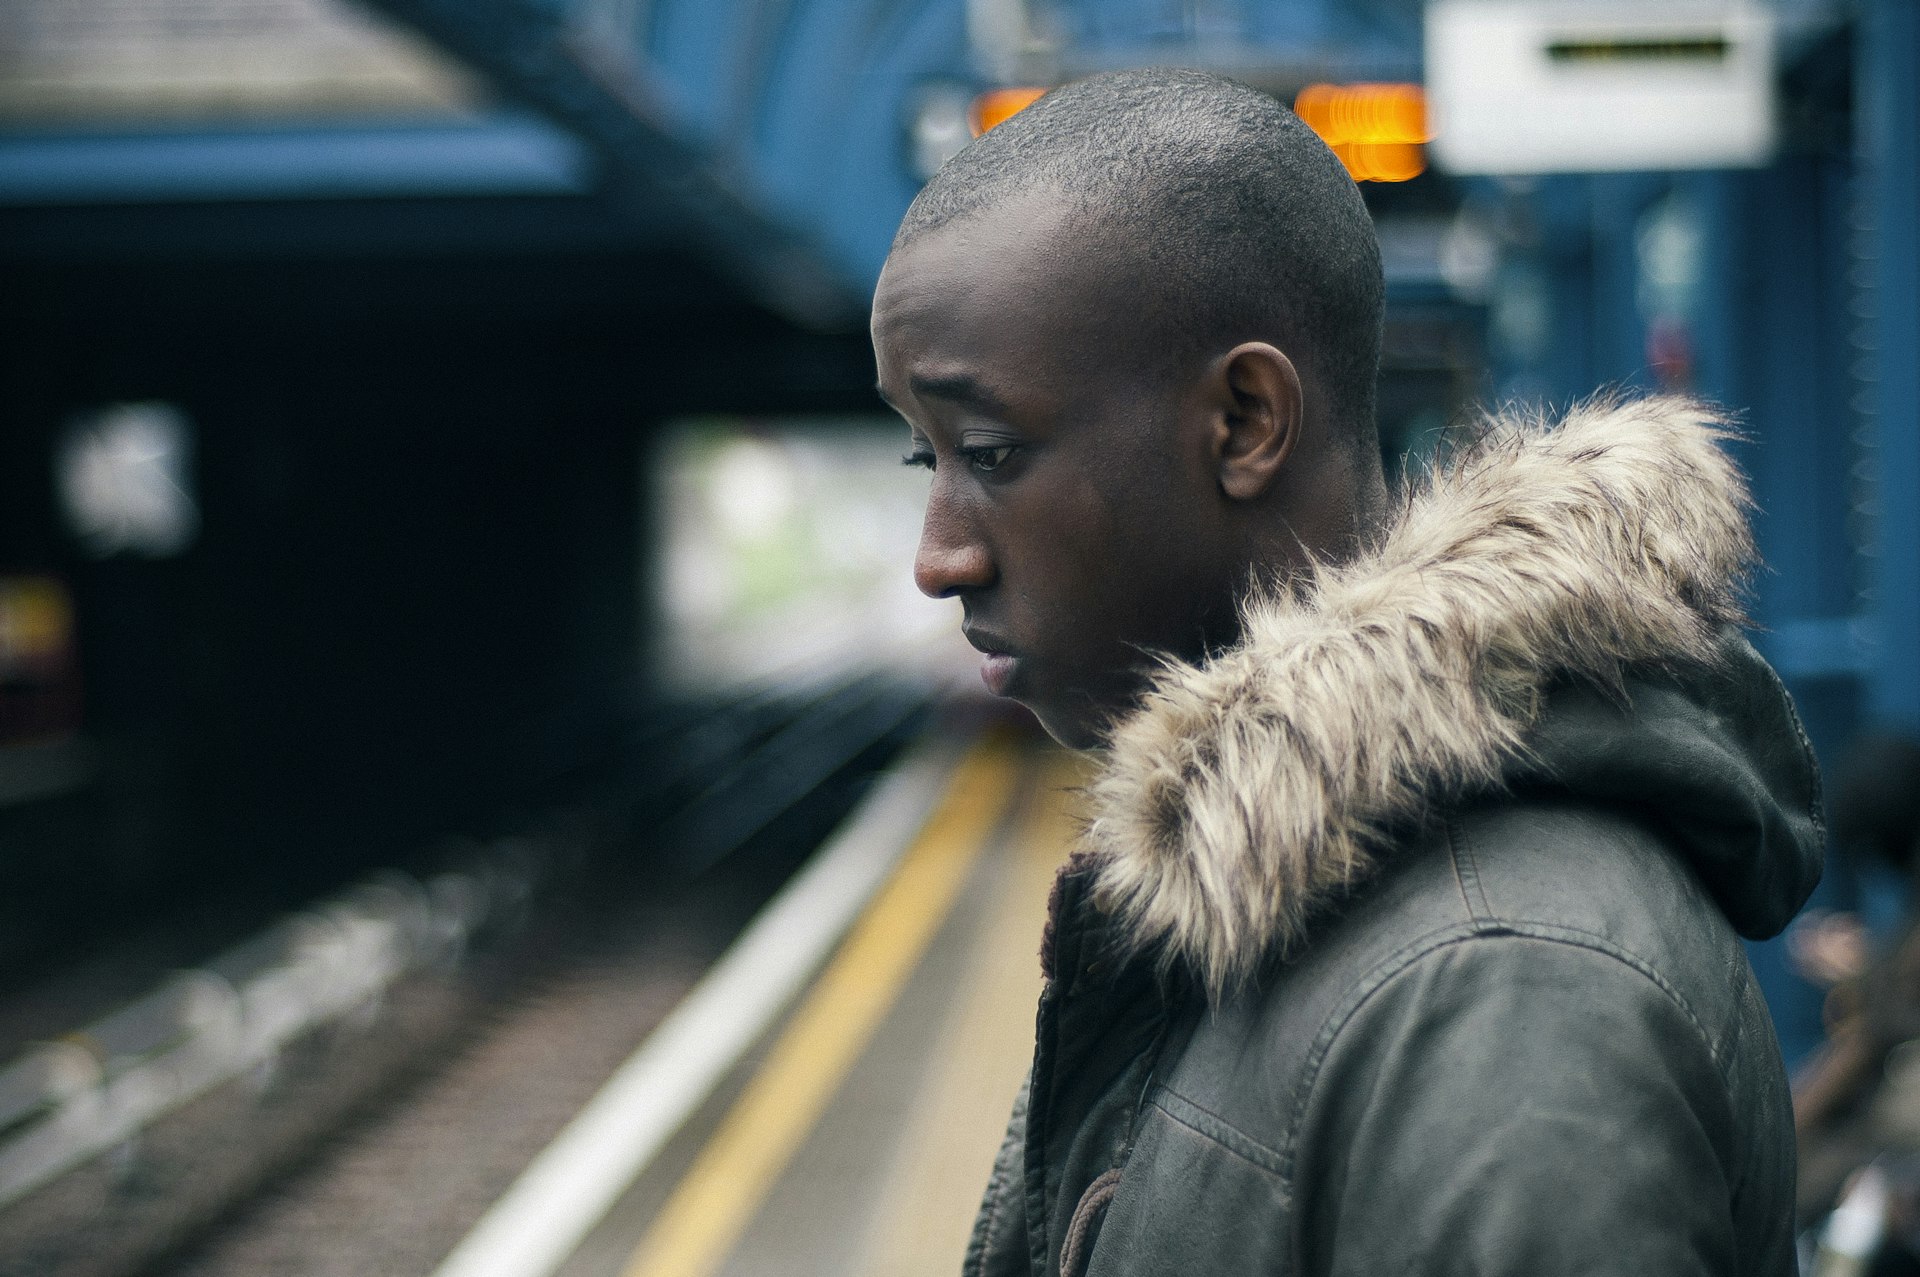 How does an African former child soldier adjust to life in London?